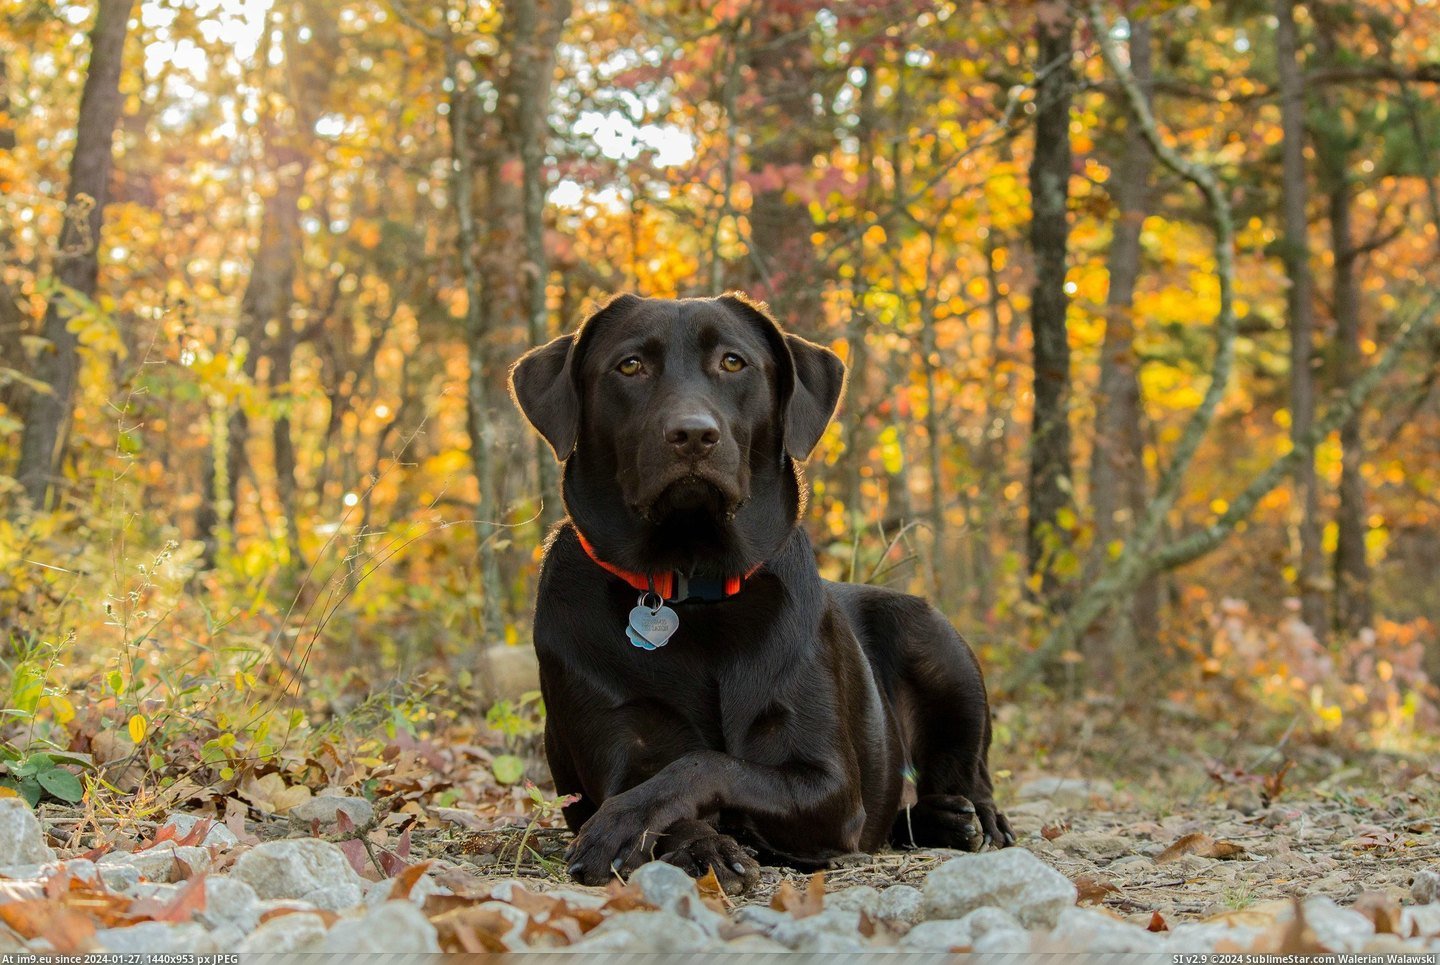 #Fuck #Dog #Majestic #Fall #Colors [Aww] Fall colors and my dog...Majestic as fuck Pic. (Image of album My r/AWW favs))